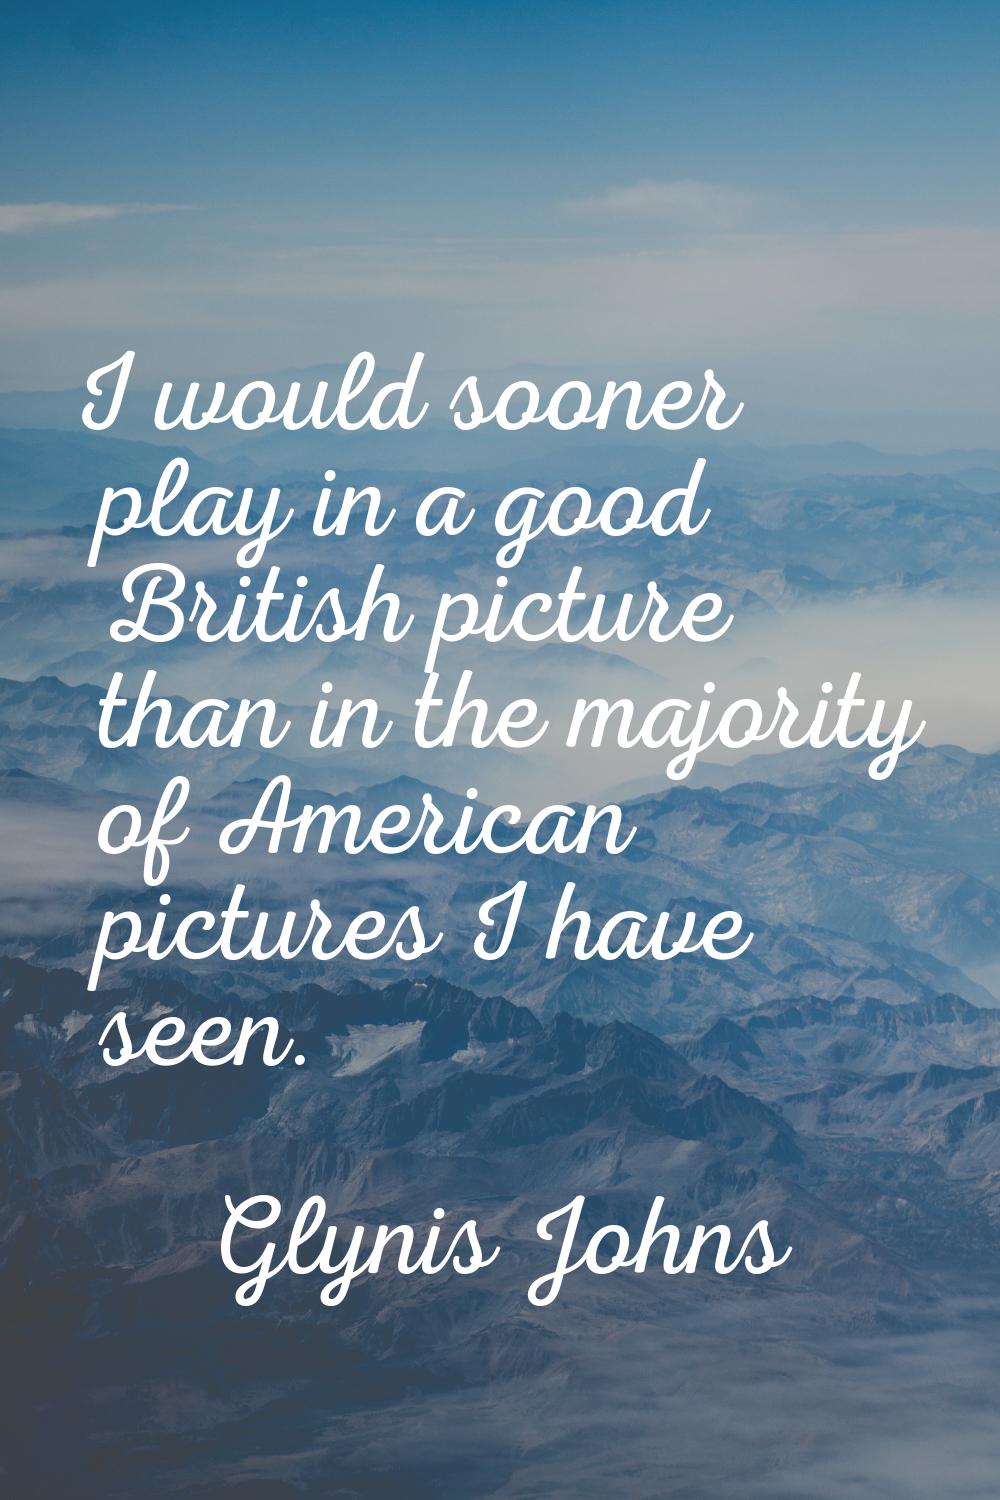 I would sooner play in a good British picture than in the majority of American pictures I have seen